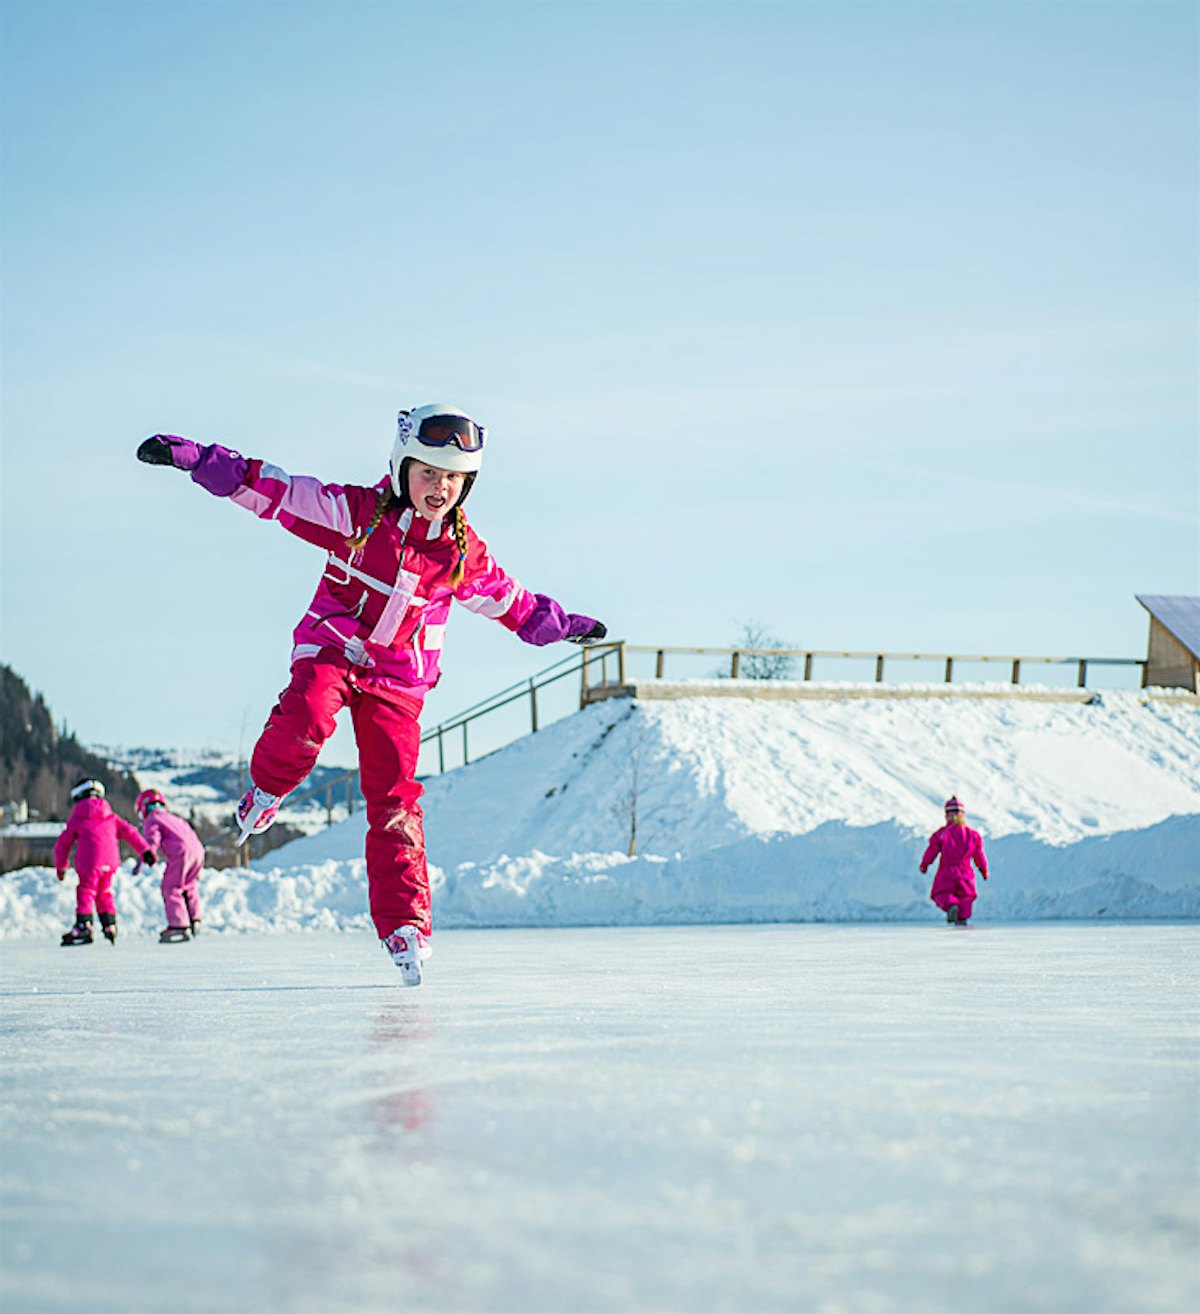 Children have fun in great winter weather on ice skates on the ice rink at Topcamp Hallingdal. Photo